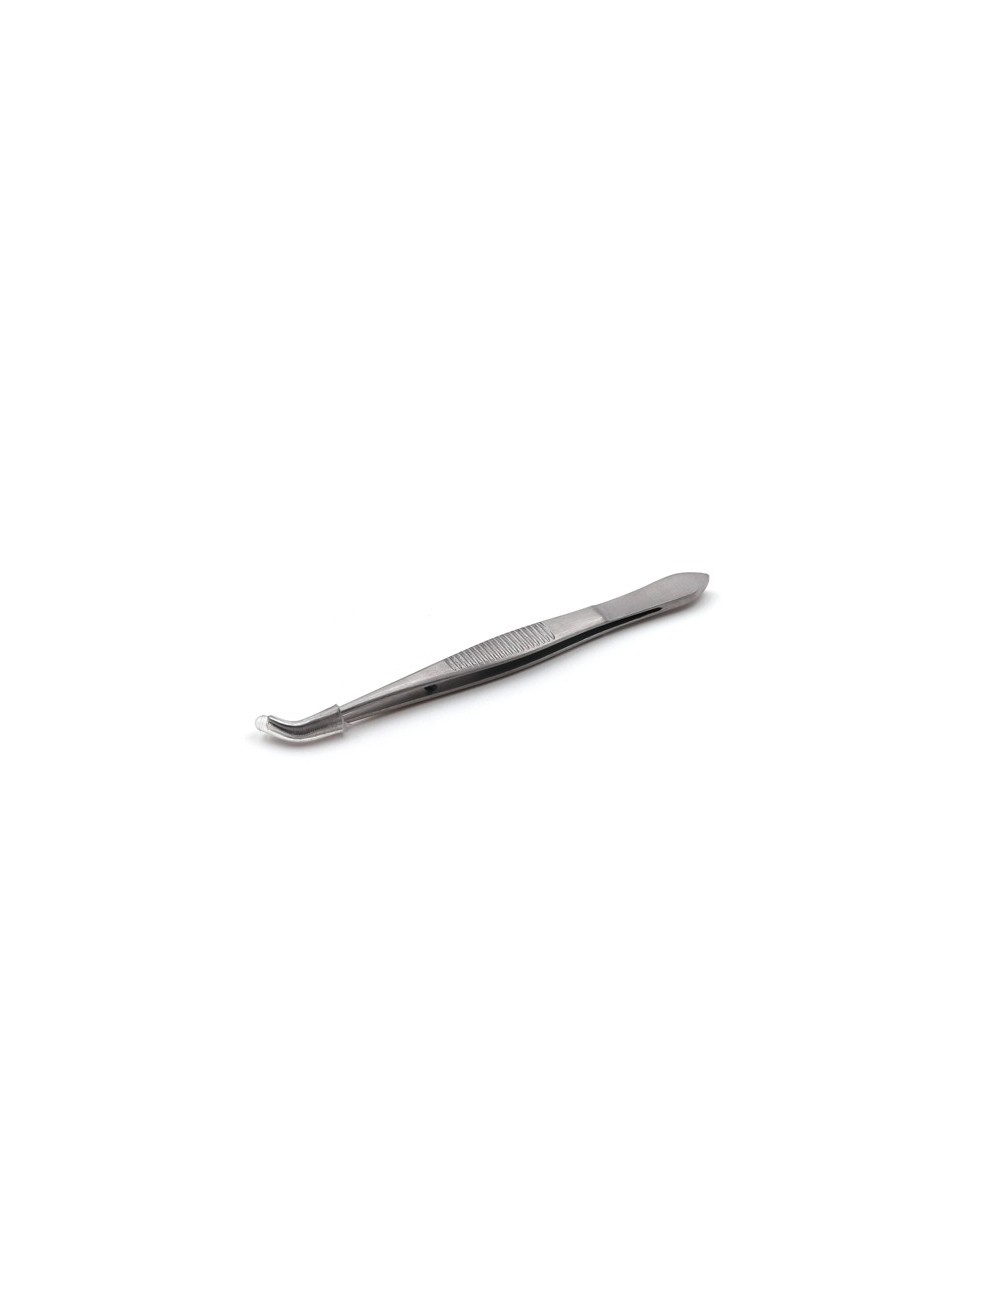 PINCE DISSECTION FINE GRAEFE A IRIS 10 CM - COURBE  S/G